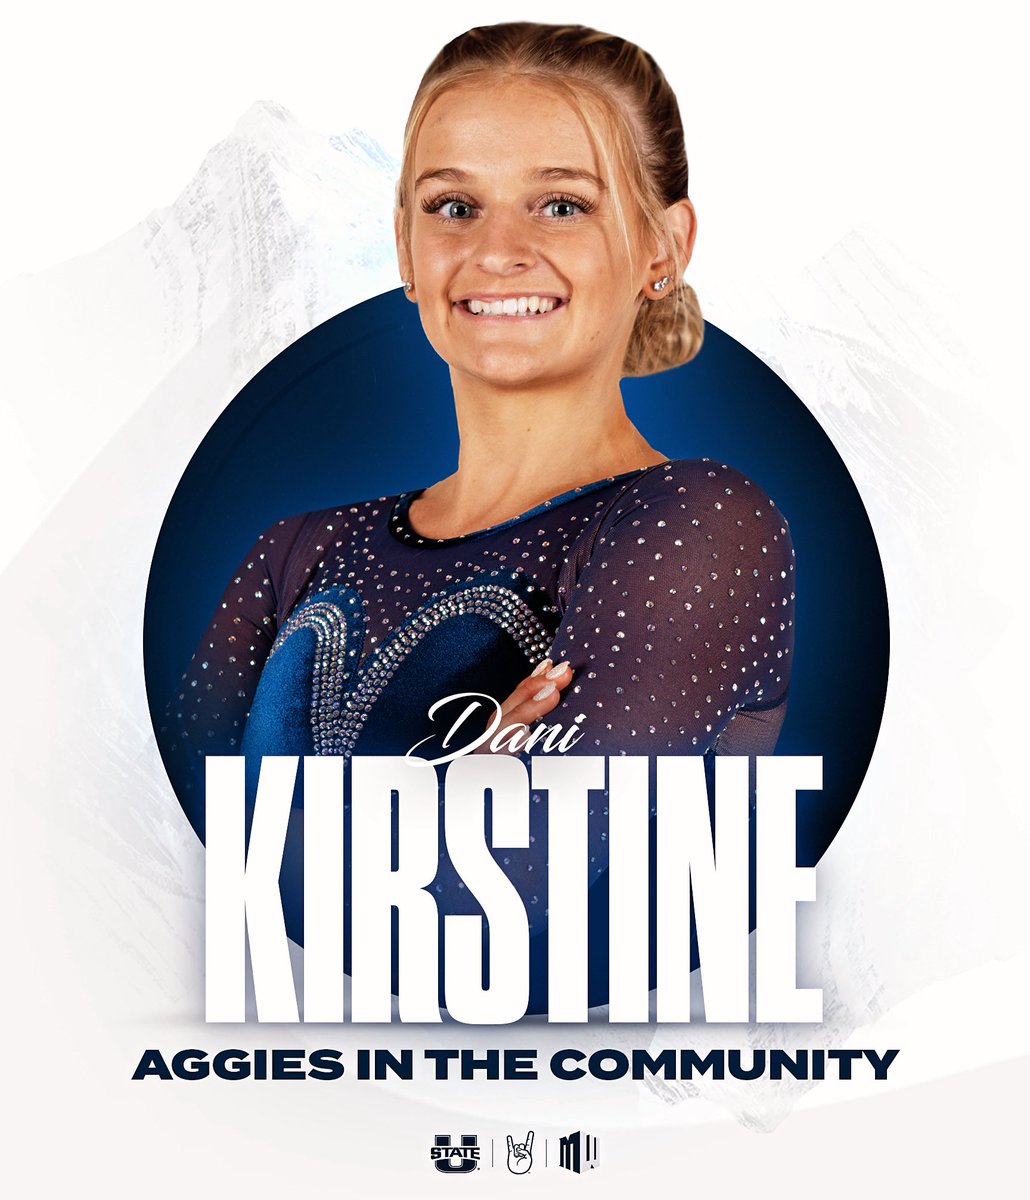 With a total of 27 individual hours of community service, our 2024 Aggies in the Community Award winner is Dani Kirstine! 👏